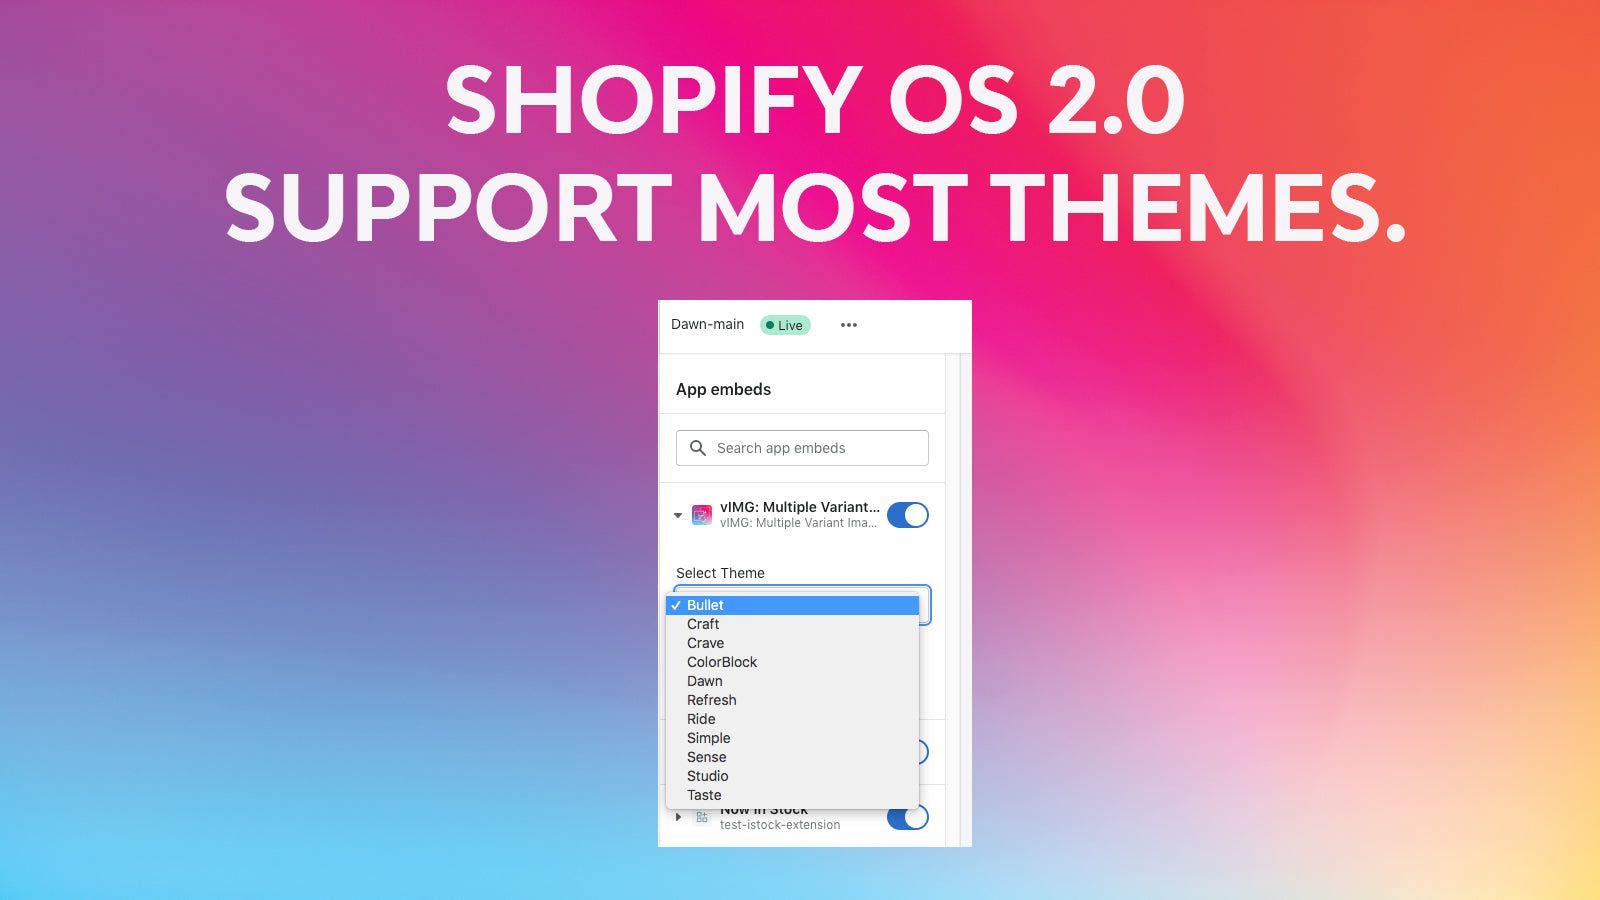 Shopify OS 2.0. Support most themes.